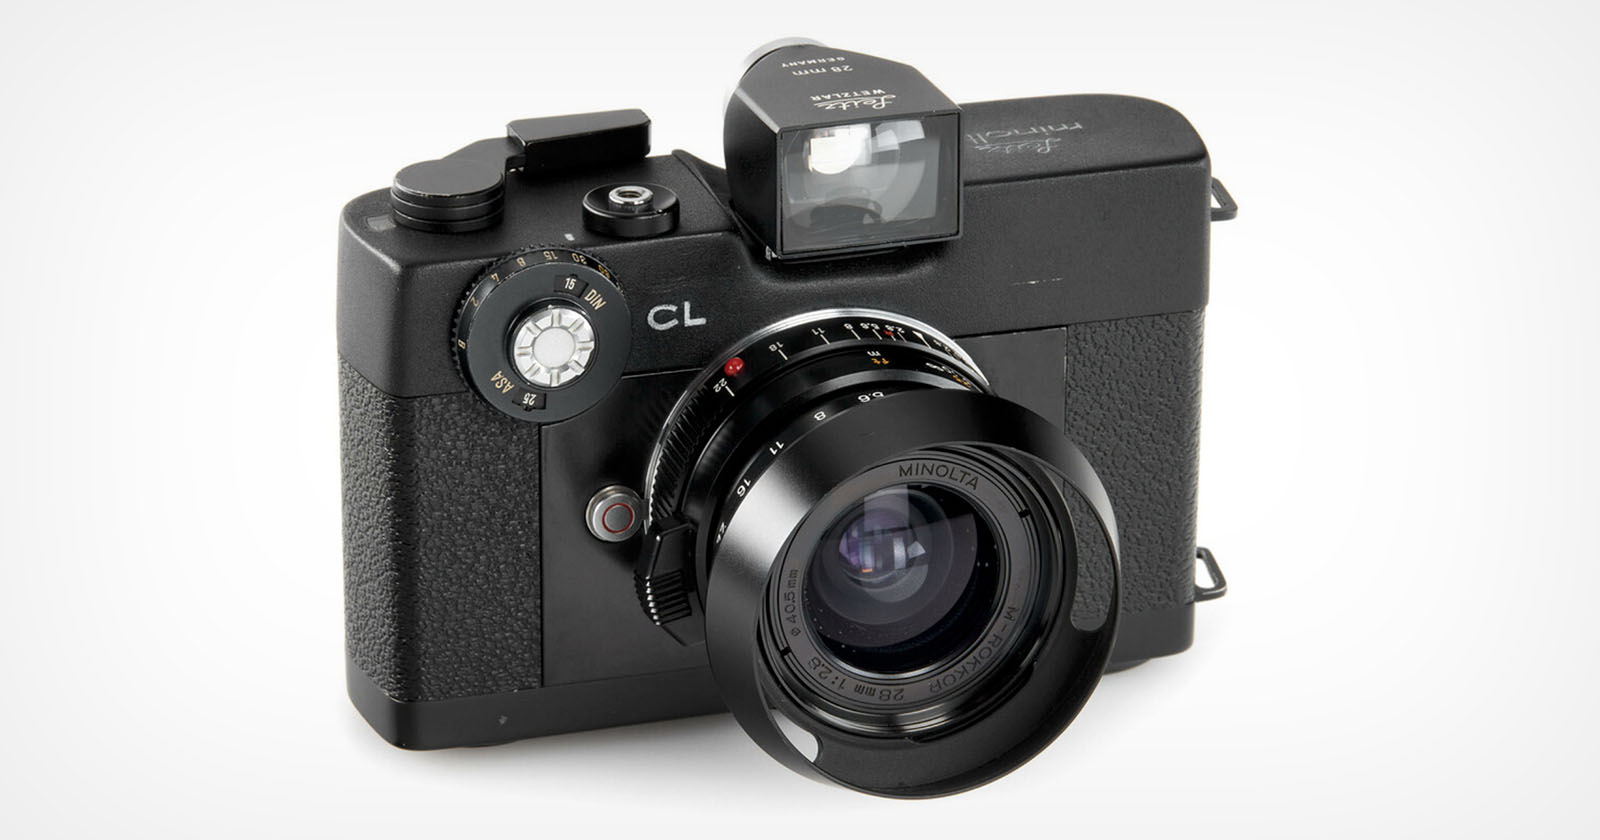 One-of-a-Kind 1970 Leica CL Prototype is Available Now for $65,000